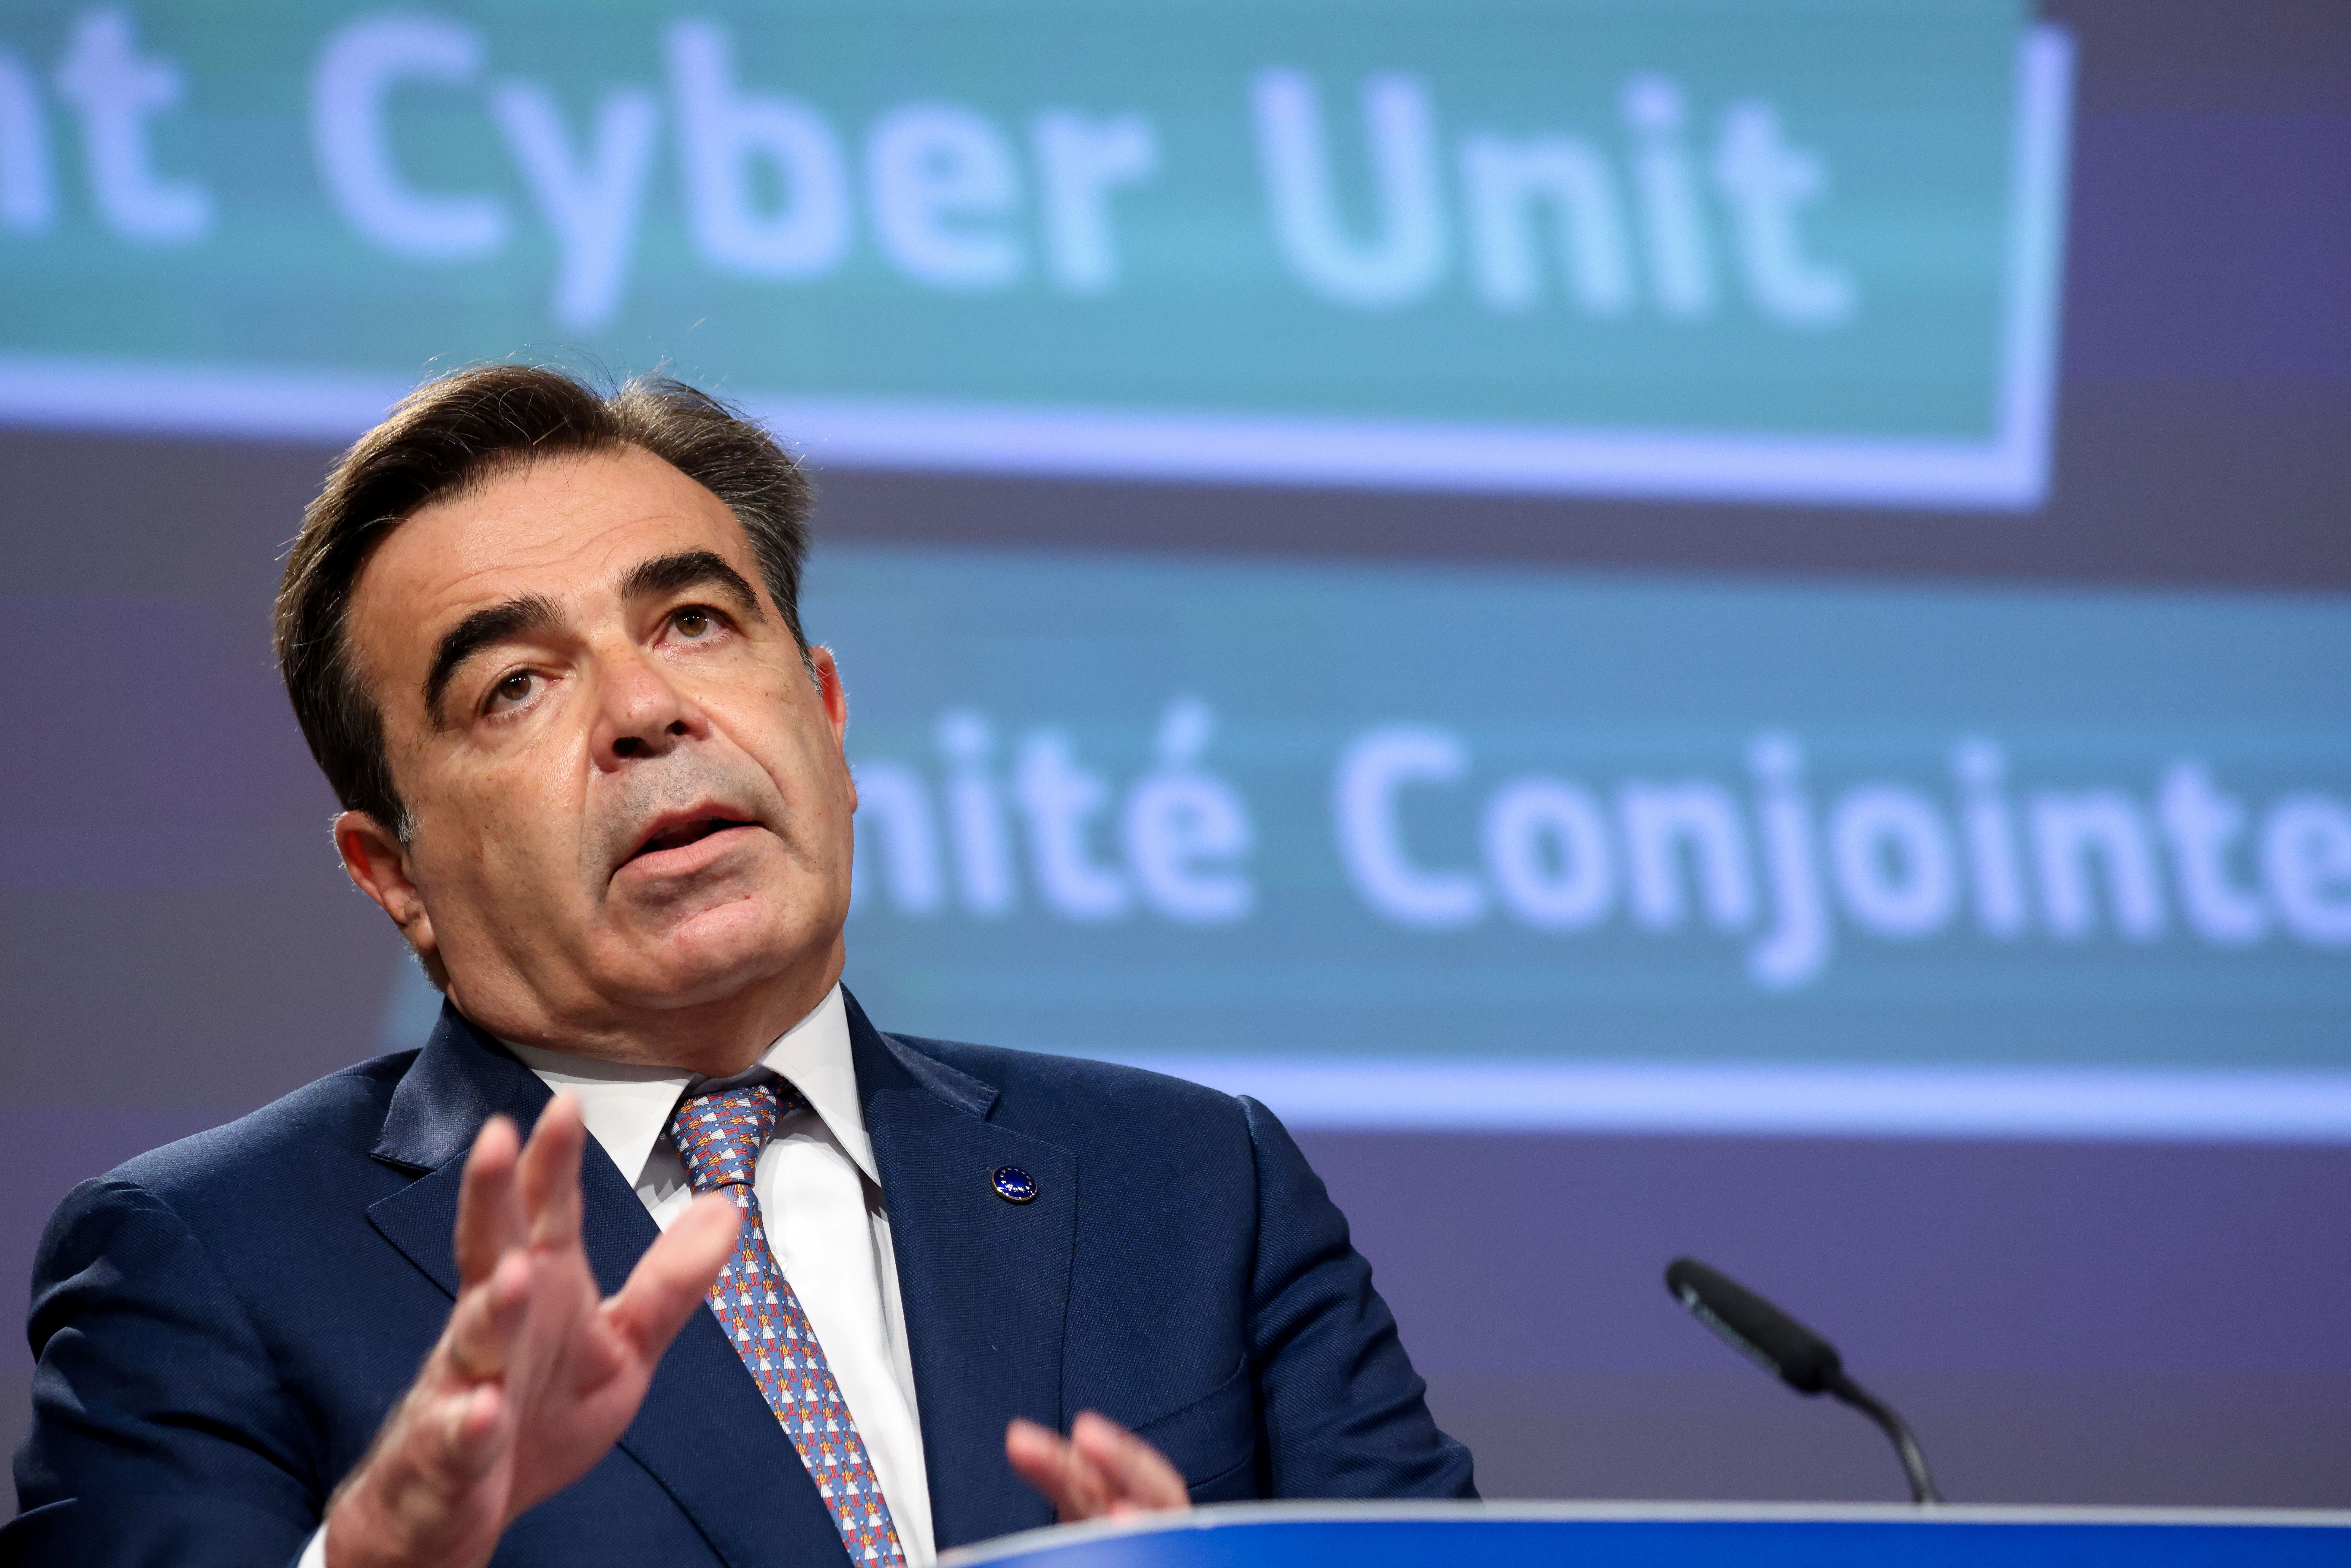 News conference on security and cybersecurity strategy at the EU headquarters in Brussels